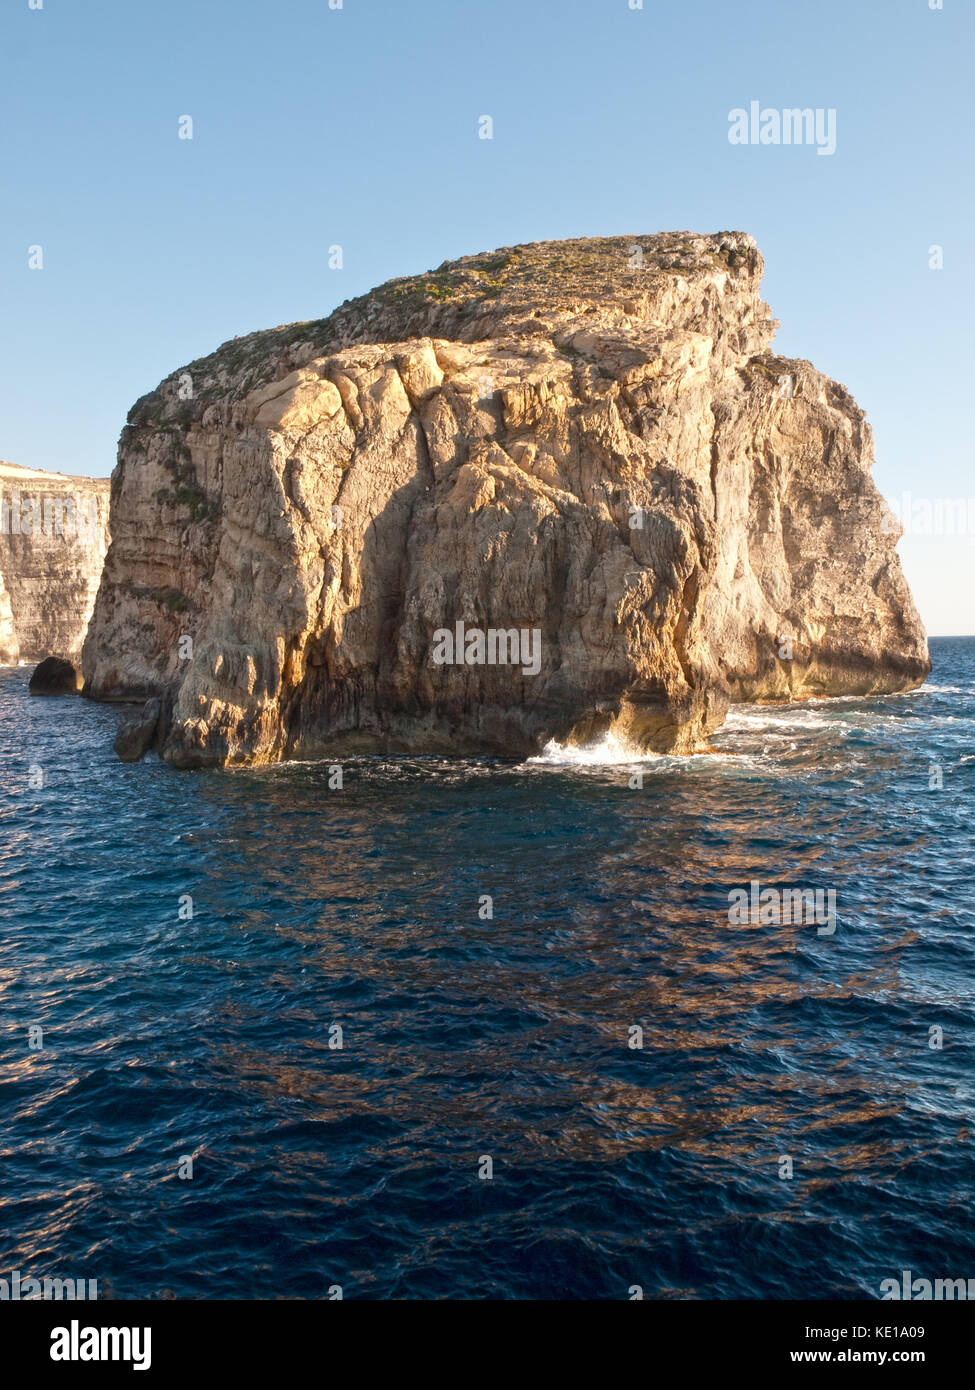 Fungus Rock at Dwejra in Gozo is home to an endemic fungus like plant said to have medicinal qualities Stock Photo